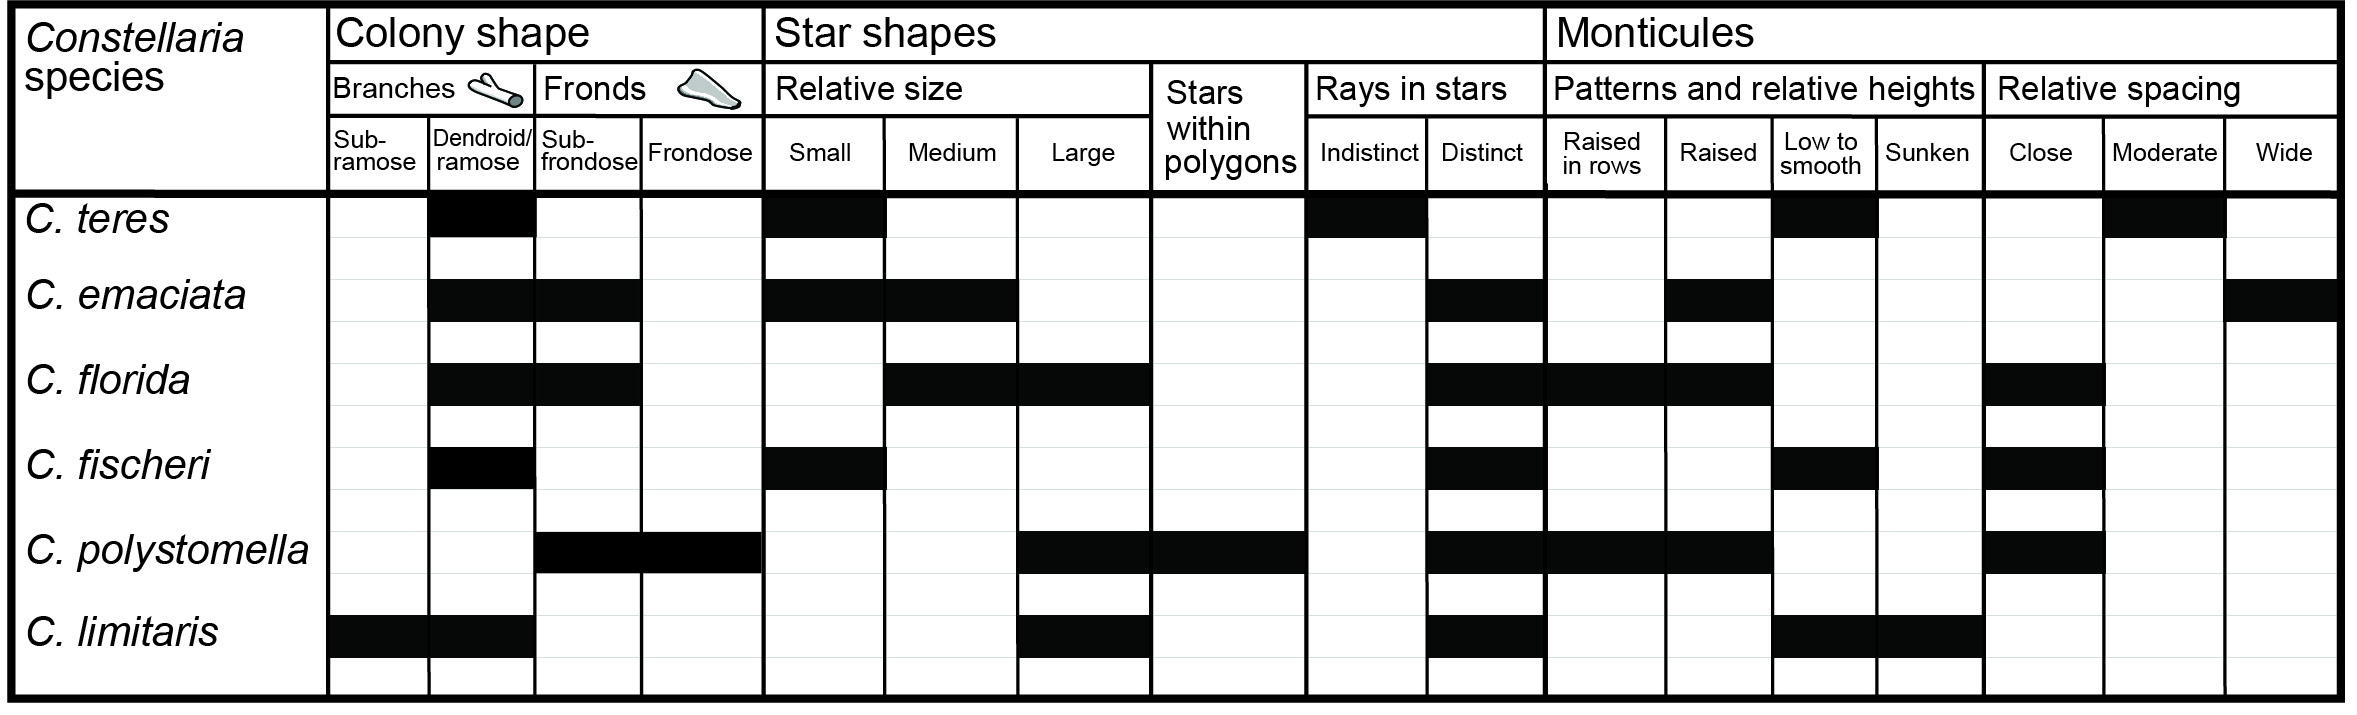 Table containing details about the differences between species of Constellaria